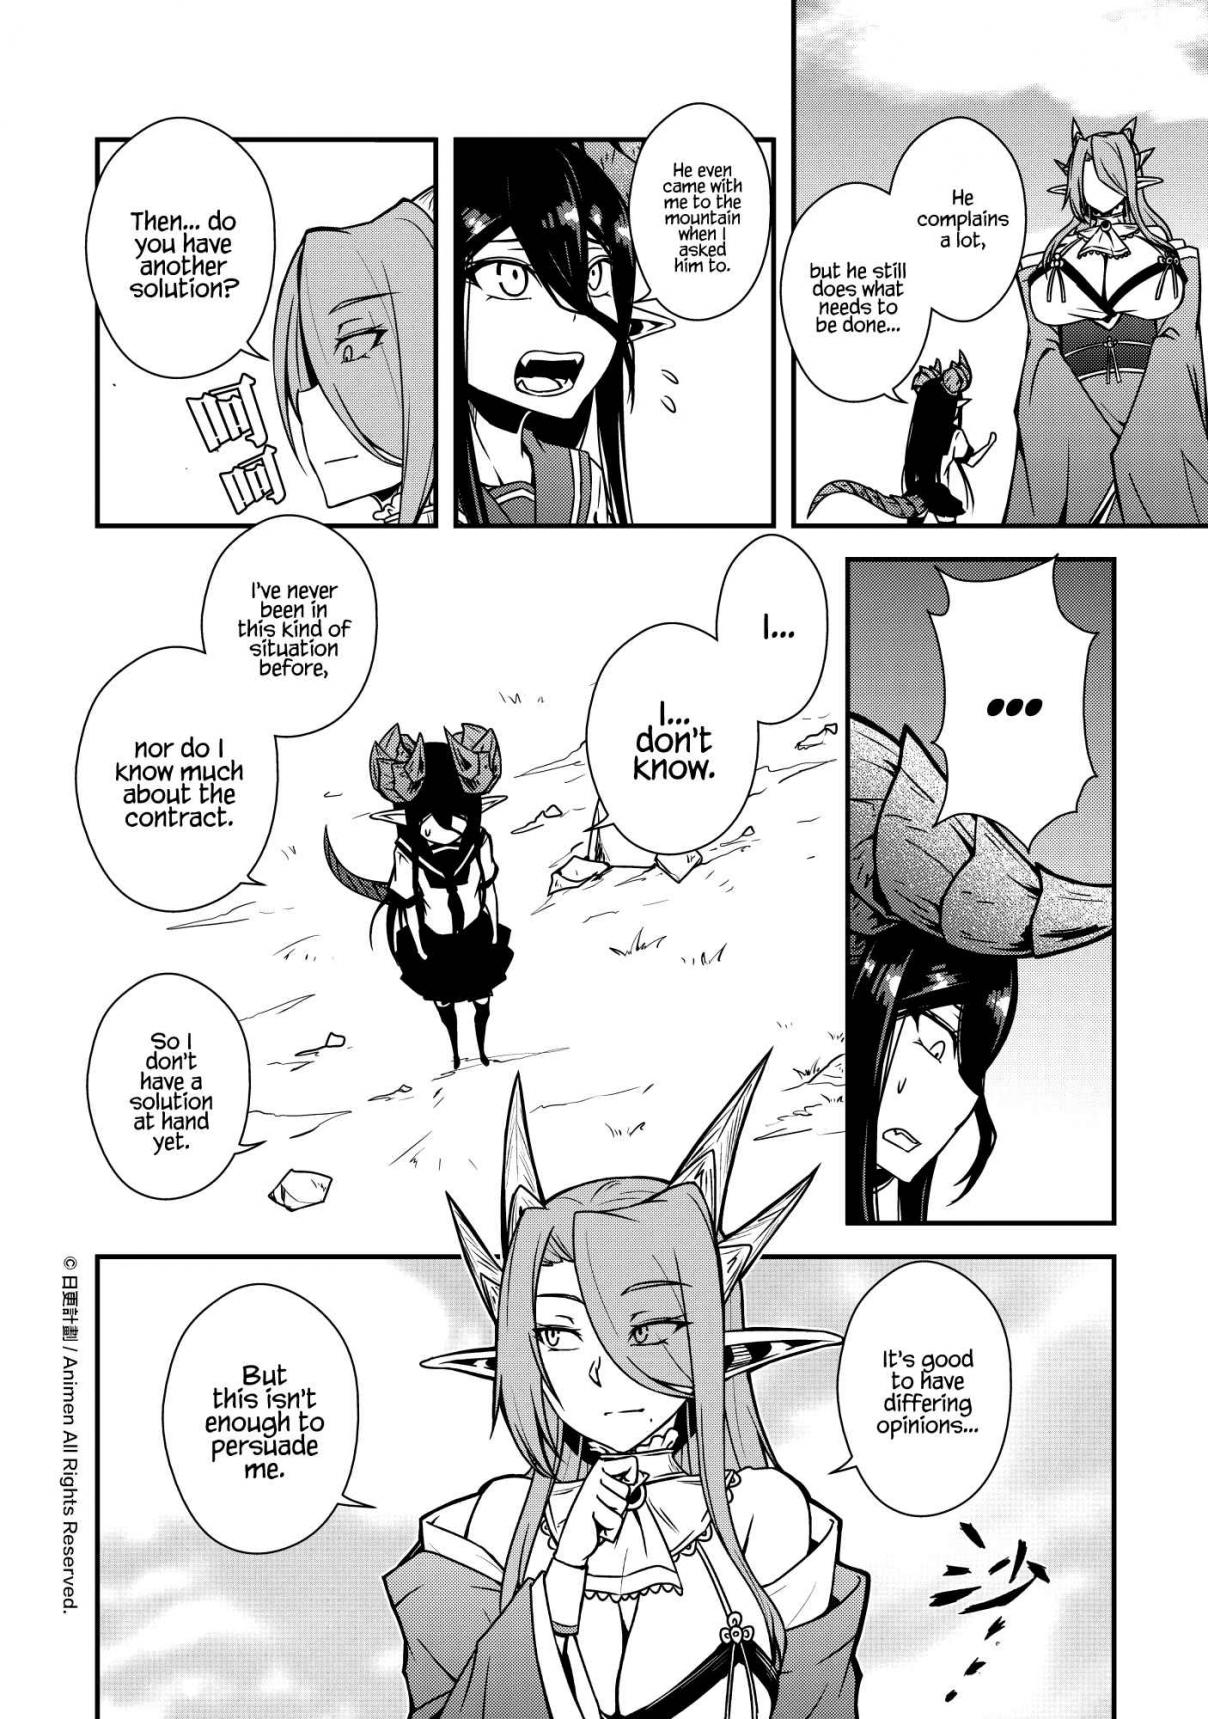 The Girl With Horns Vol. 1 Ch. 8 Divine Retribution